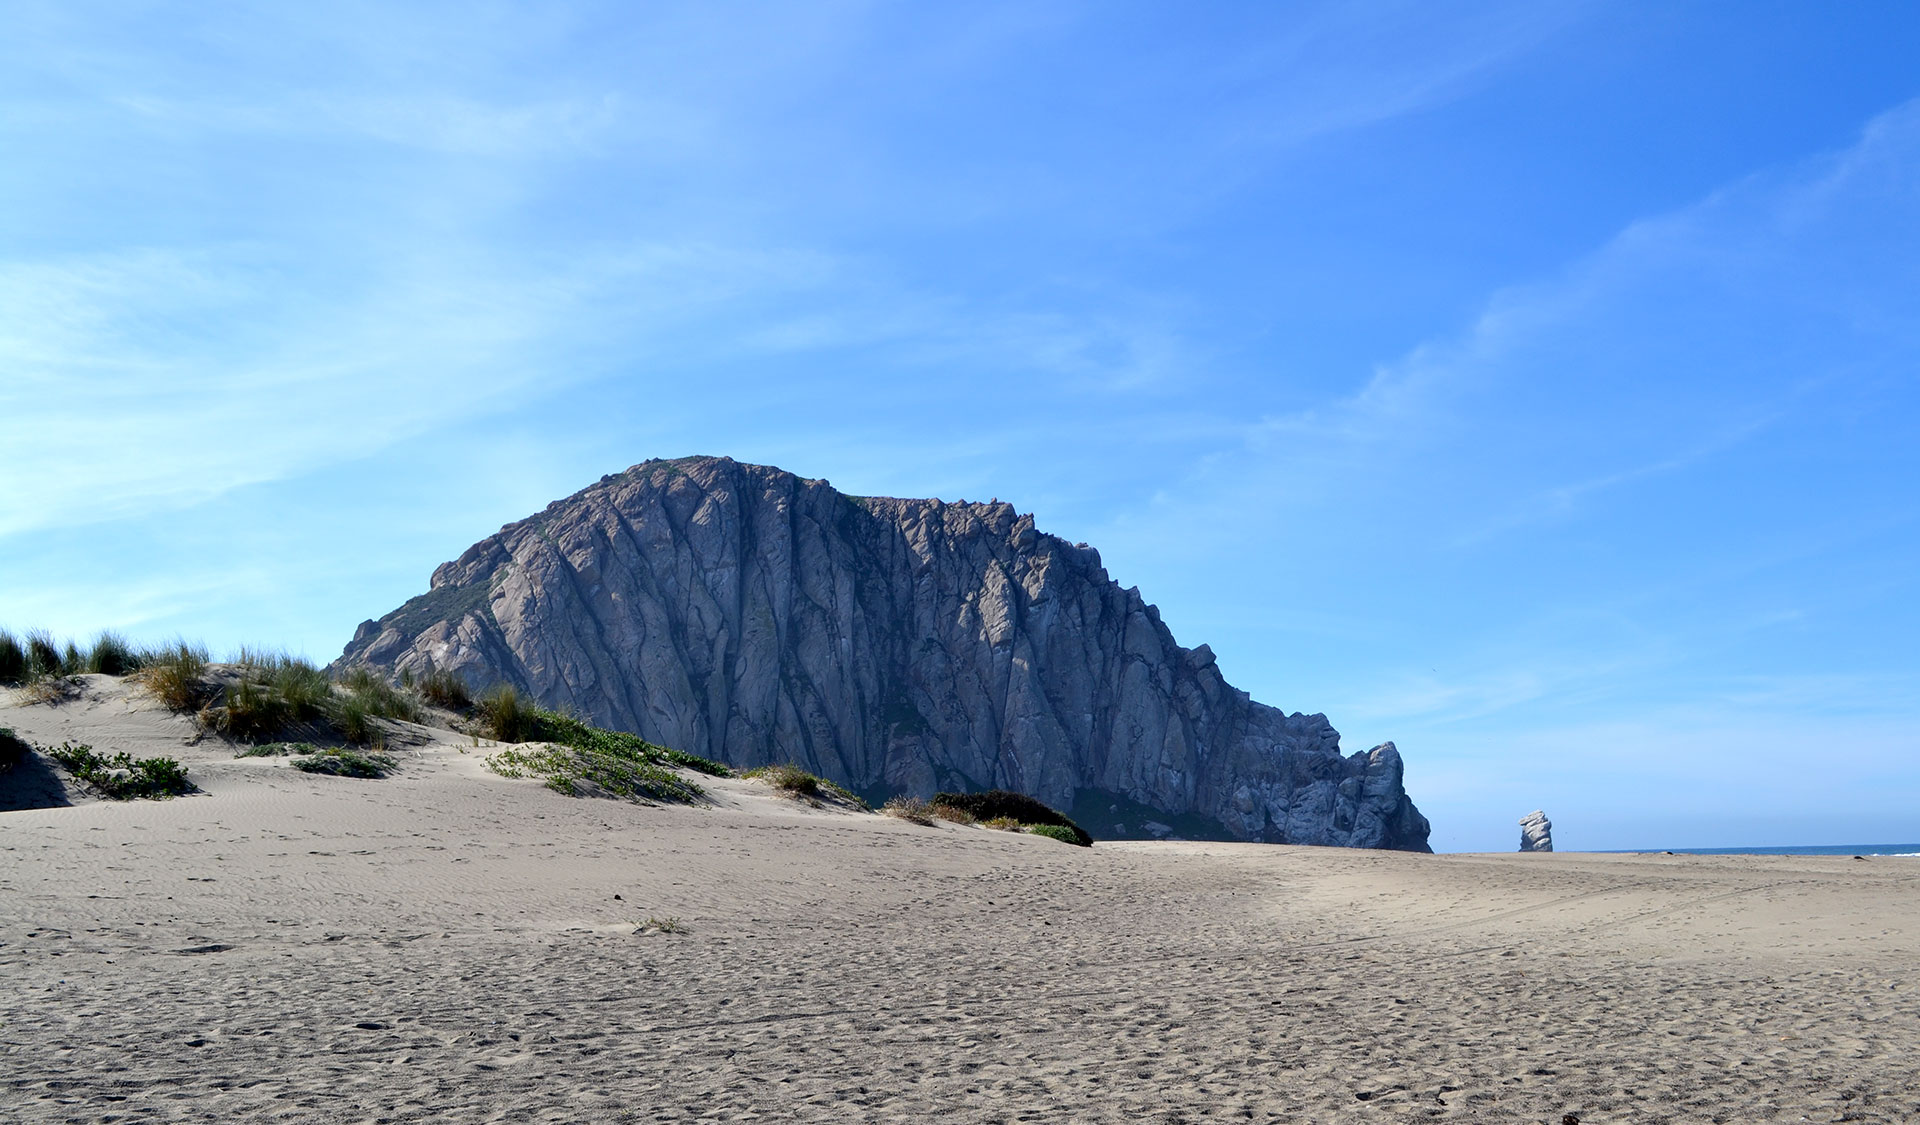 Morro Rock provides a backdrop for the cleanup. Volunteers take a few minutes to appreciate the scene before getting to work. 'It’s nice and calm,' said Nikki Gan, 1st year Business major and club member. 'I could stay out here for ages…if I didn’t have homework.'